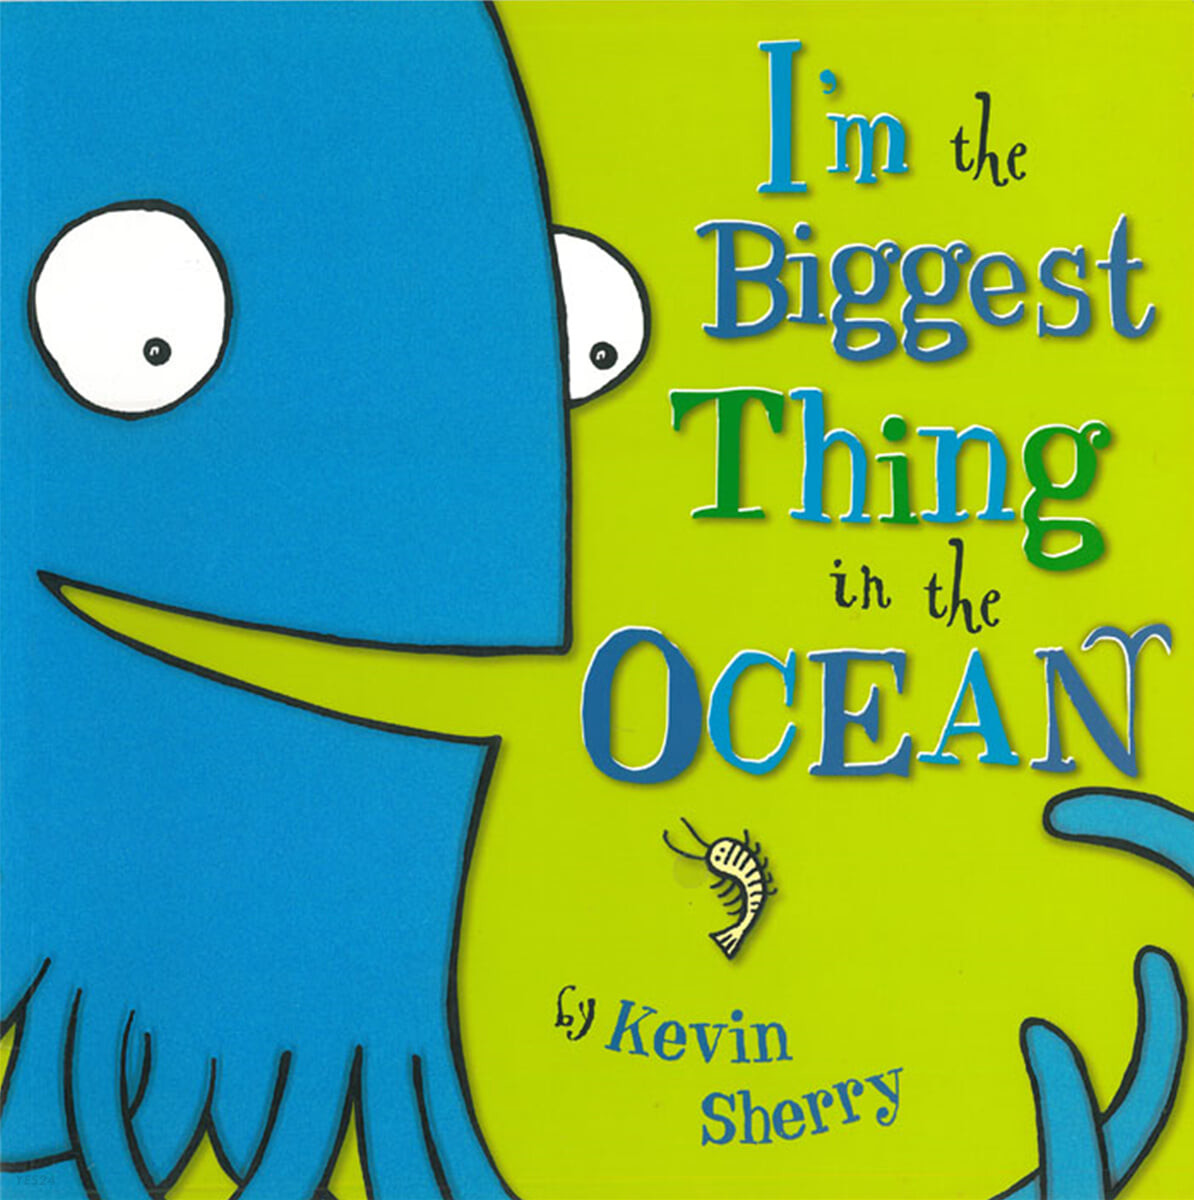 I am The Biggest Thing in the Ocean